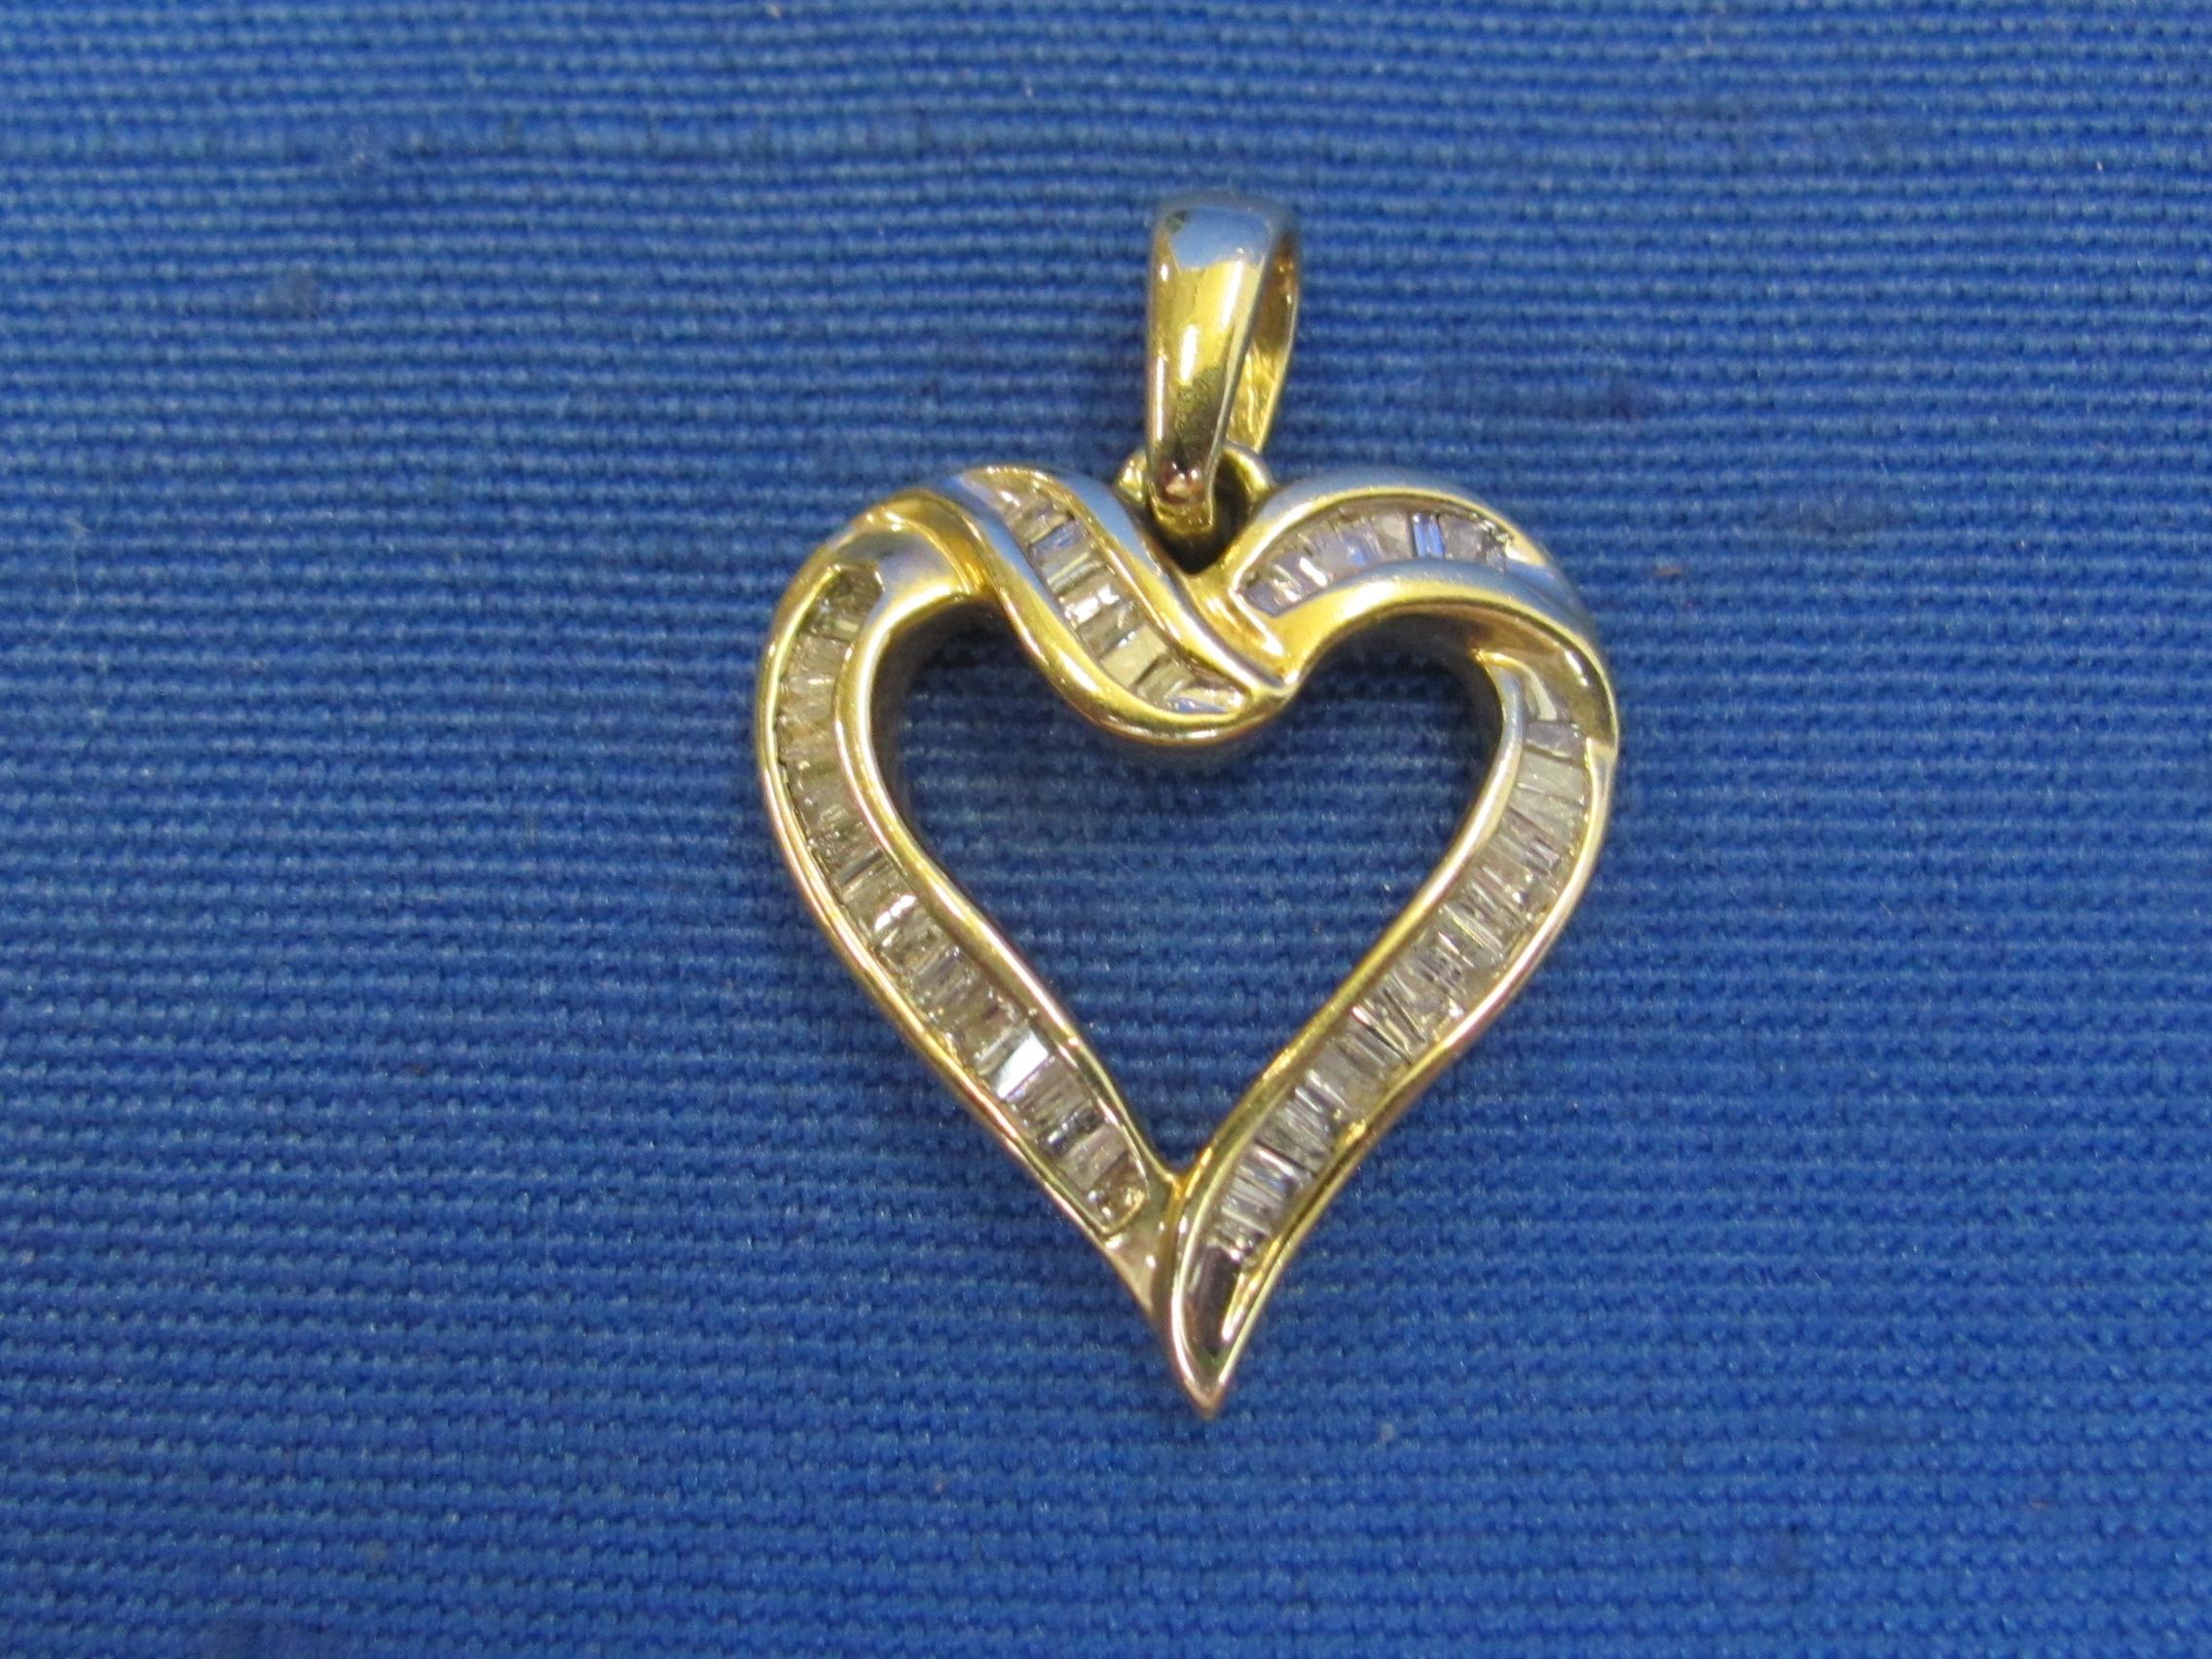 10 Kt Gold Heart Pendant with Channel Set Baguettes – 1 1/8” long – Weight is 3.3 grams